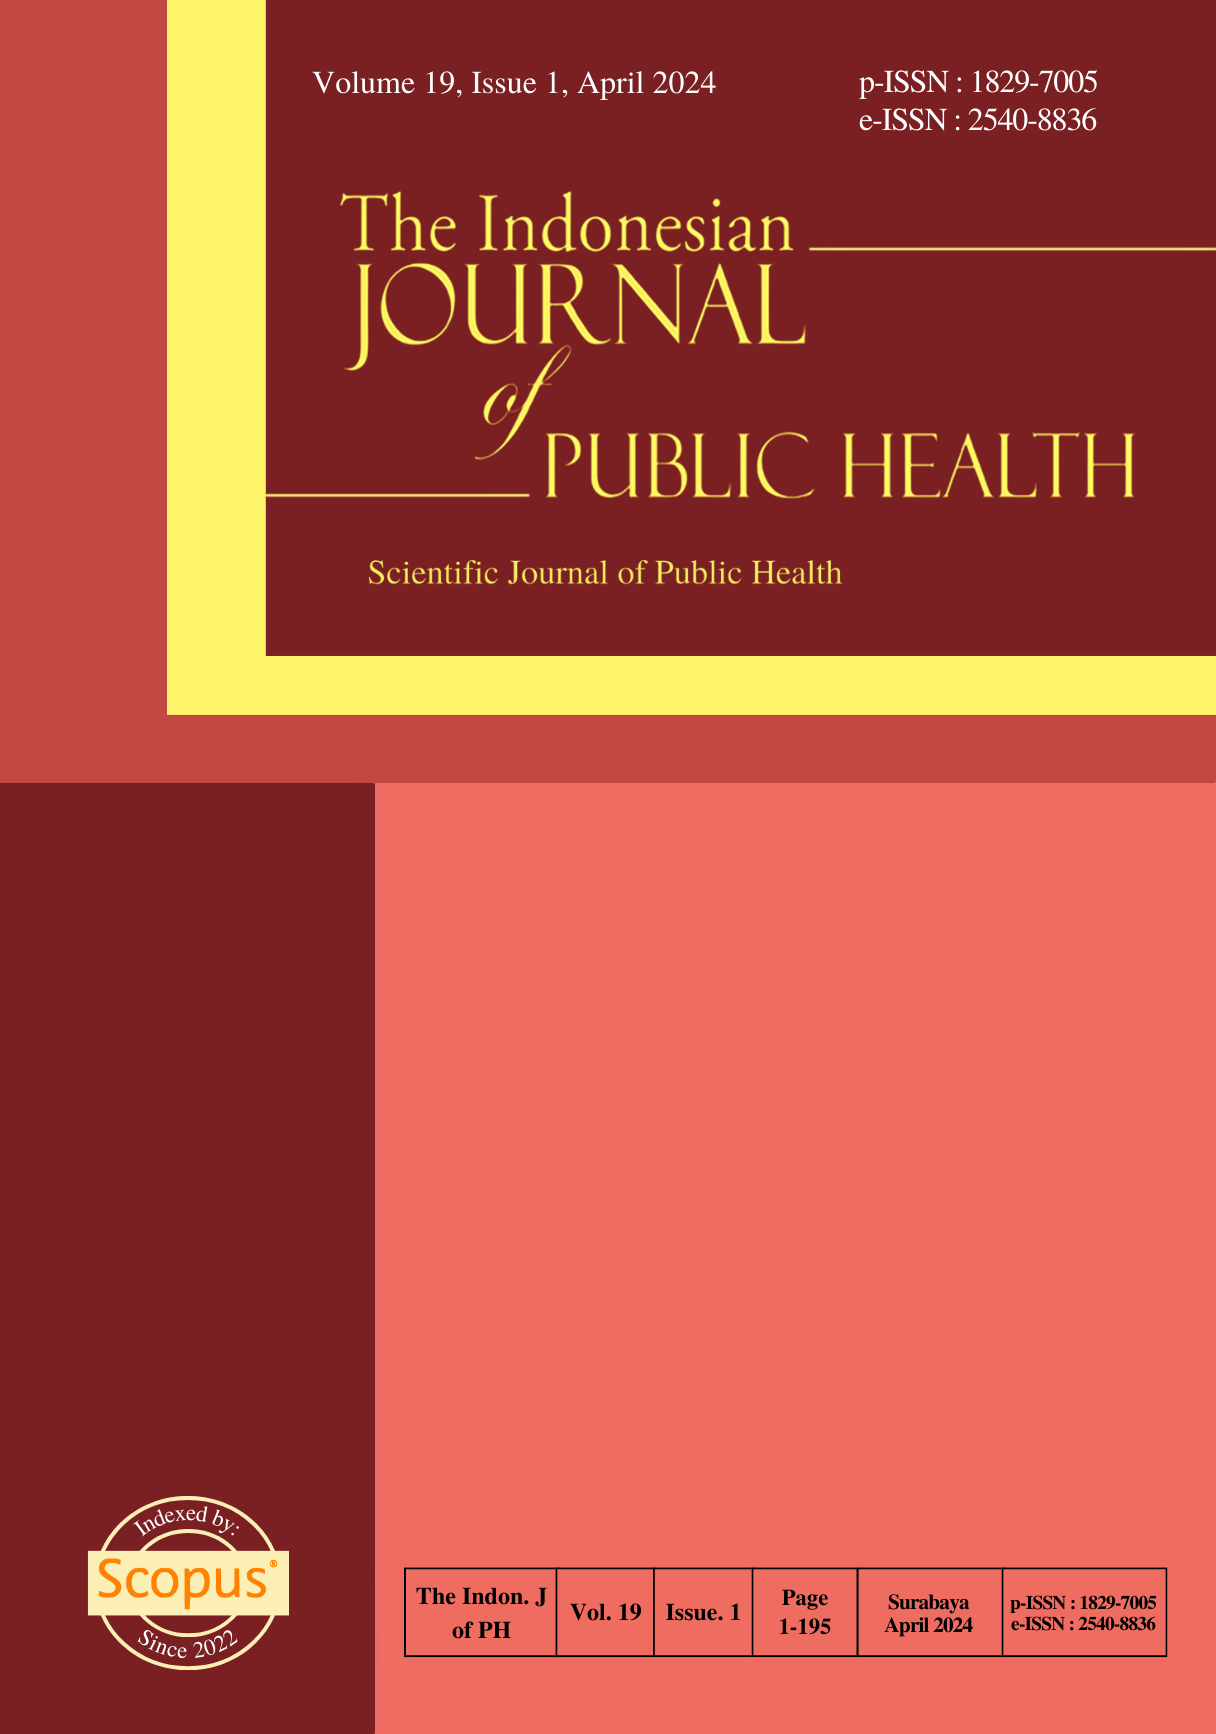 								View Vol. 19 No. 1 (2024): THE INDONESIAN JOURNAL OF PUBLIC HEALTH
							